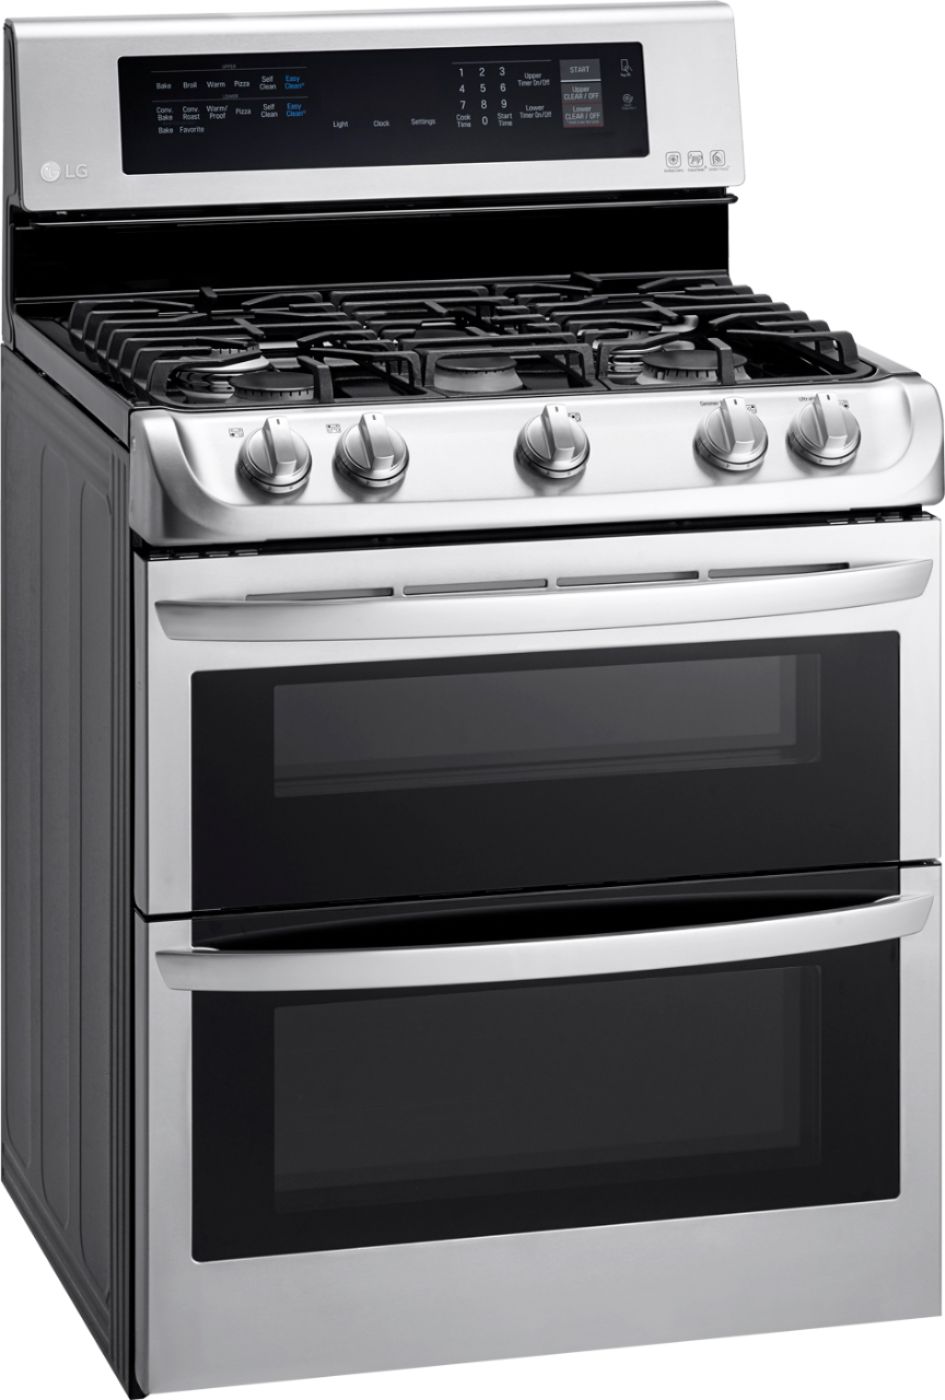 Angle View: LG - 6.9 Cu. Ft. Freestanding Double Oven Gas True Convection Range with EasyClean and UntraHeat Power Burner - Stainless Steel